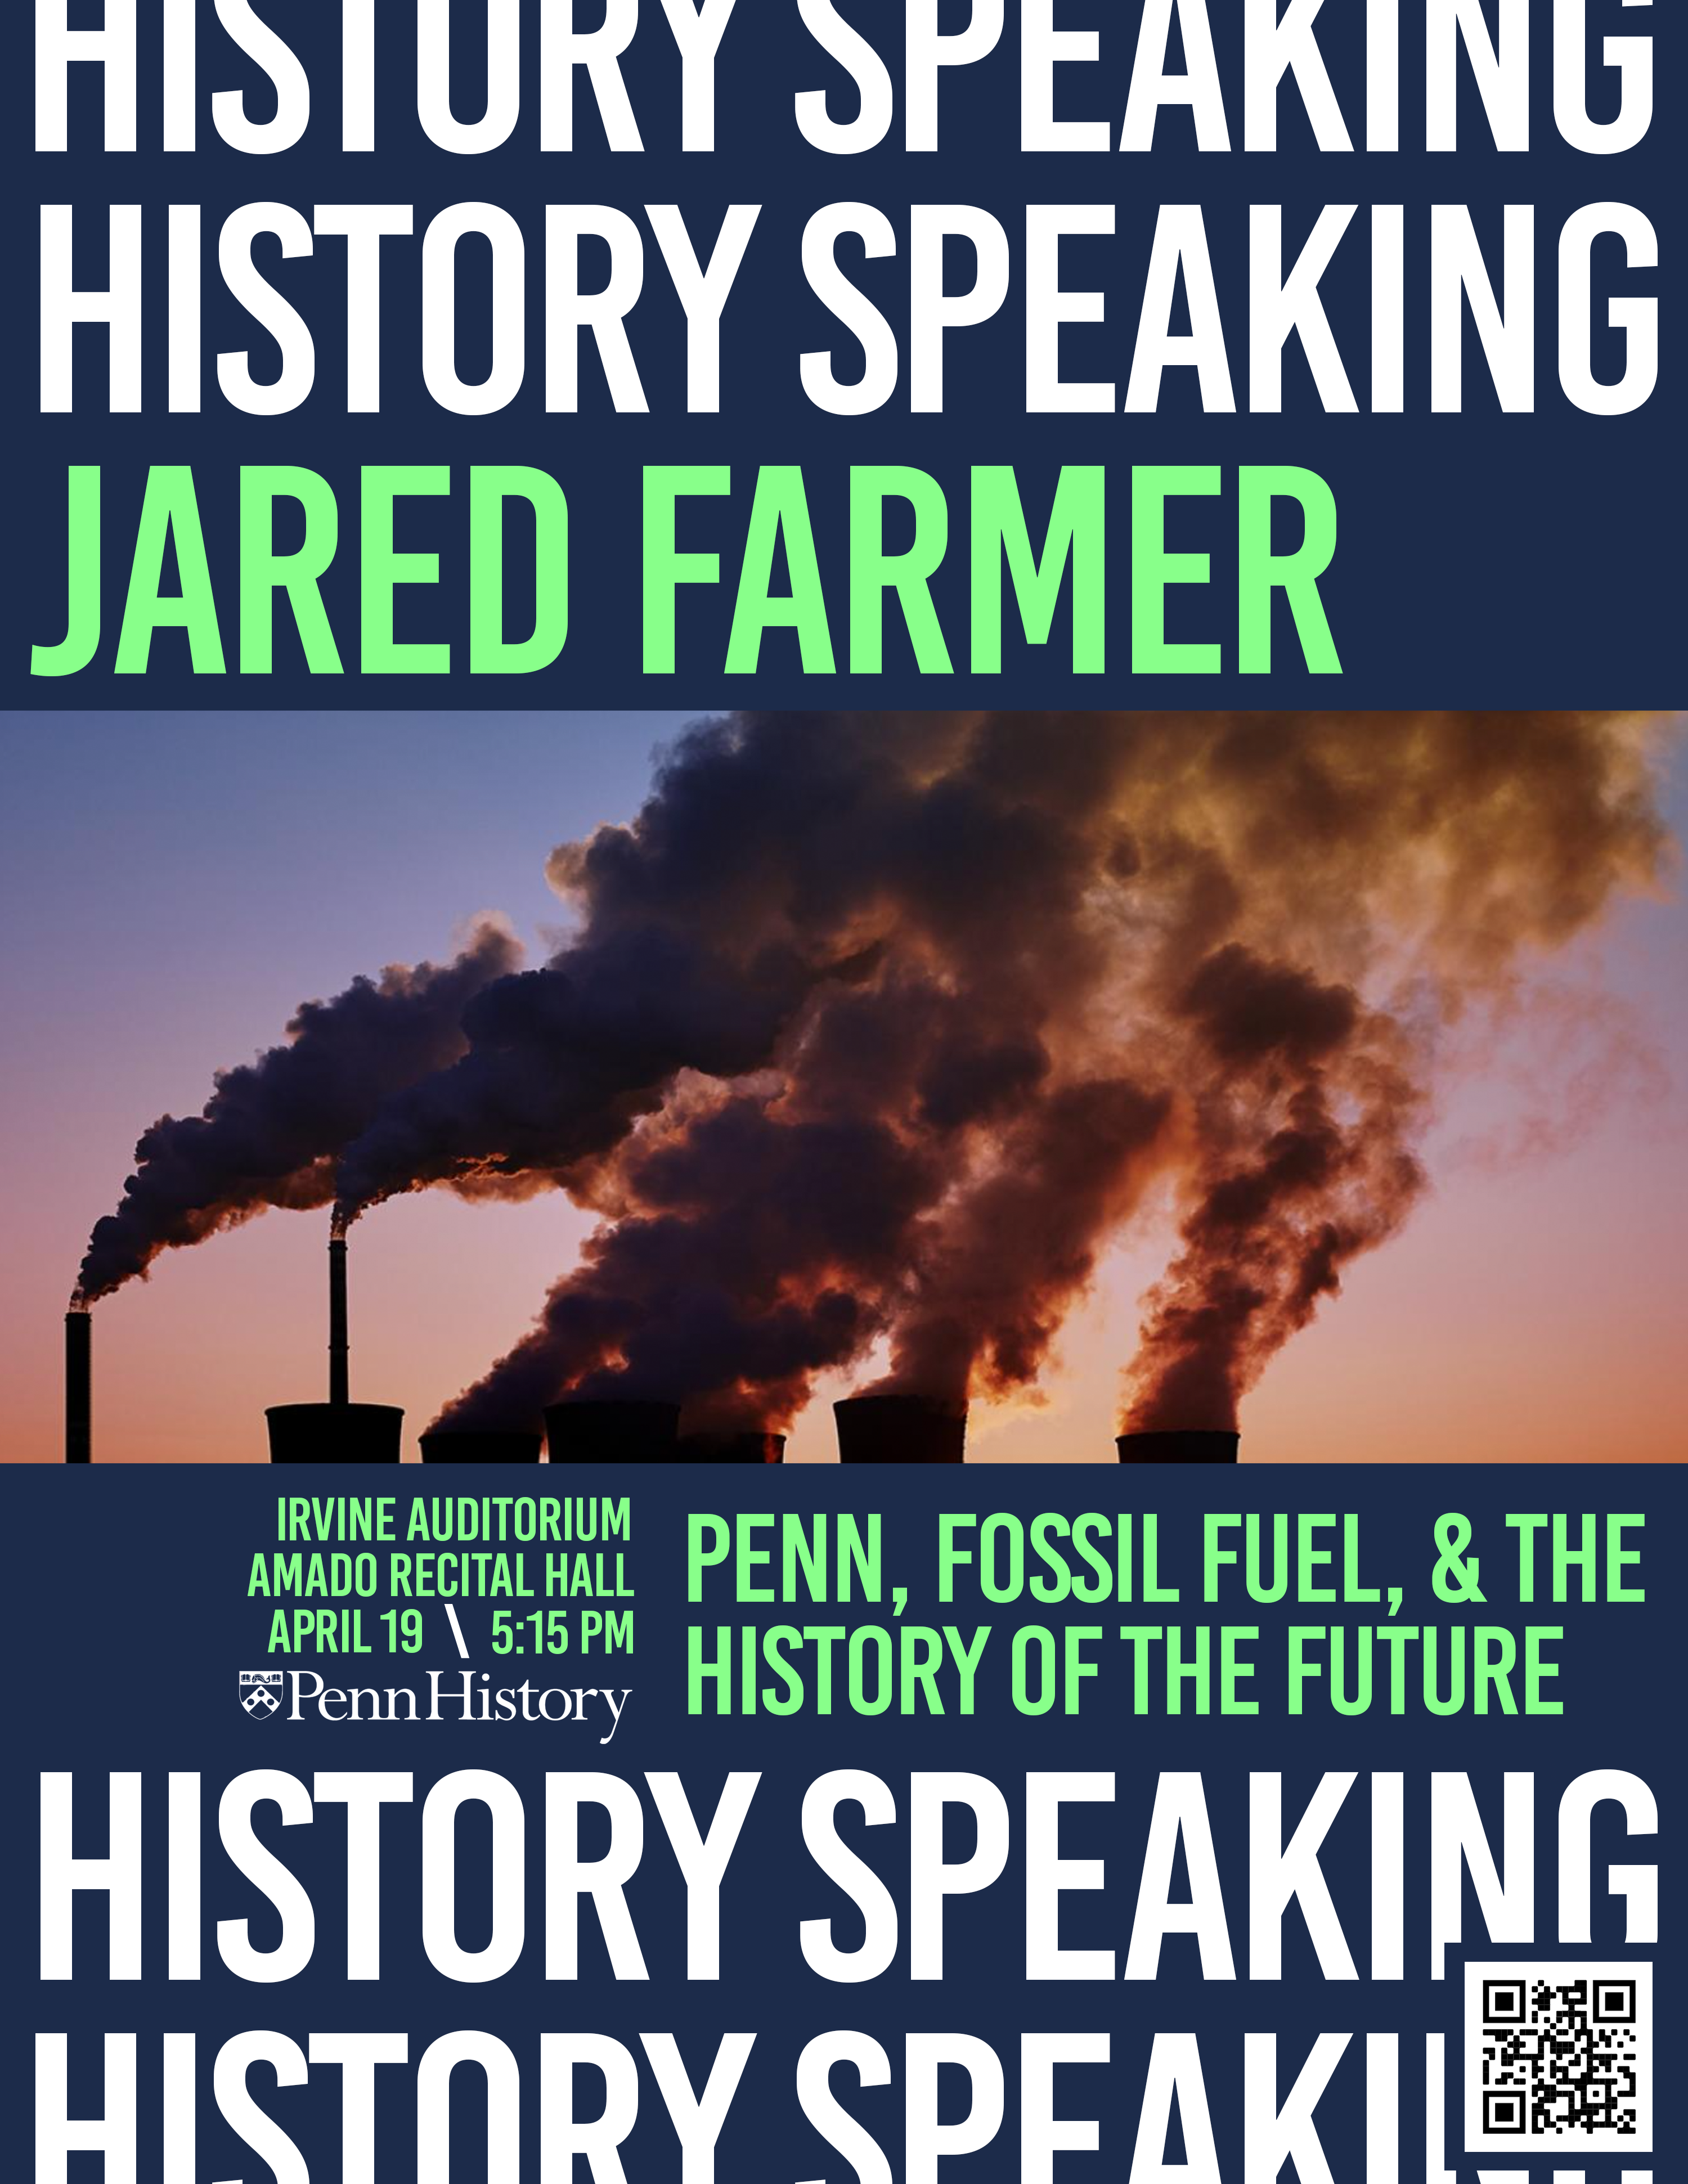 Jared Farmer History Speaking event poster, with a picture of smokestacks against a sunset 